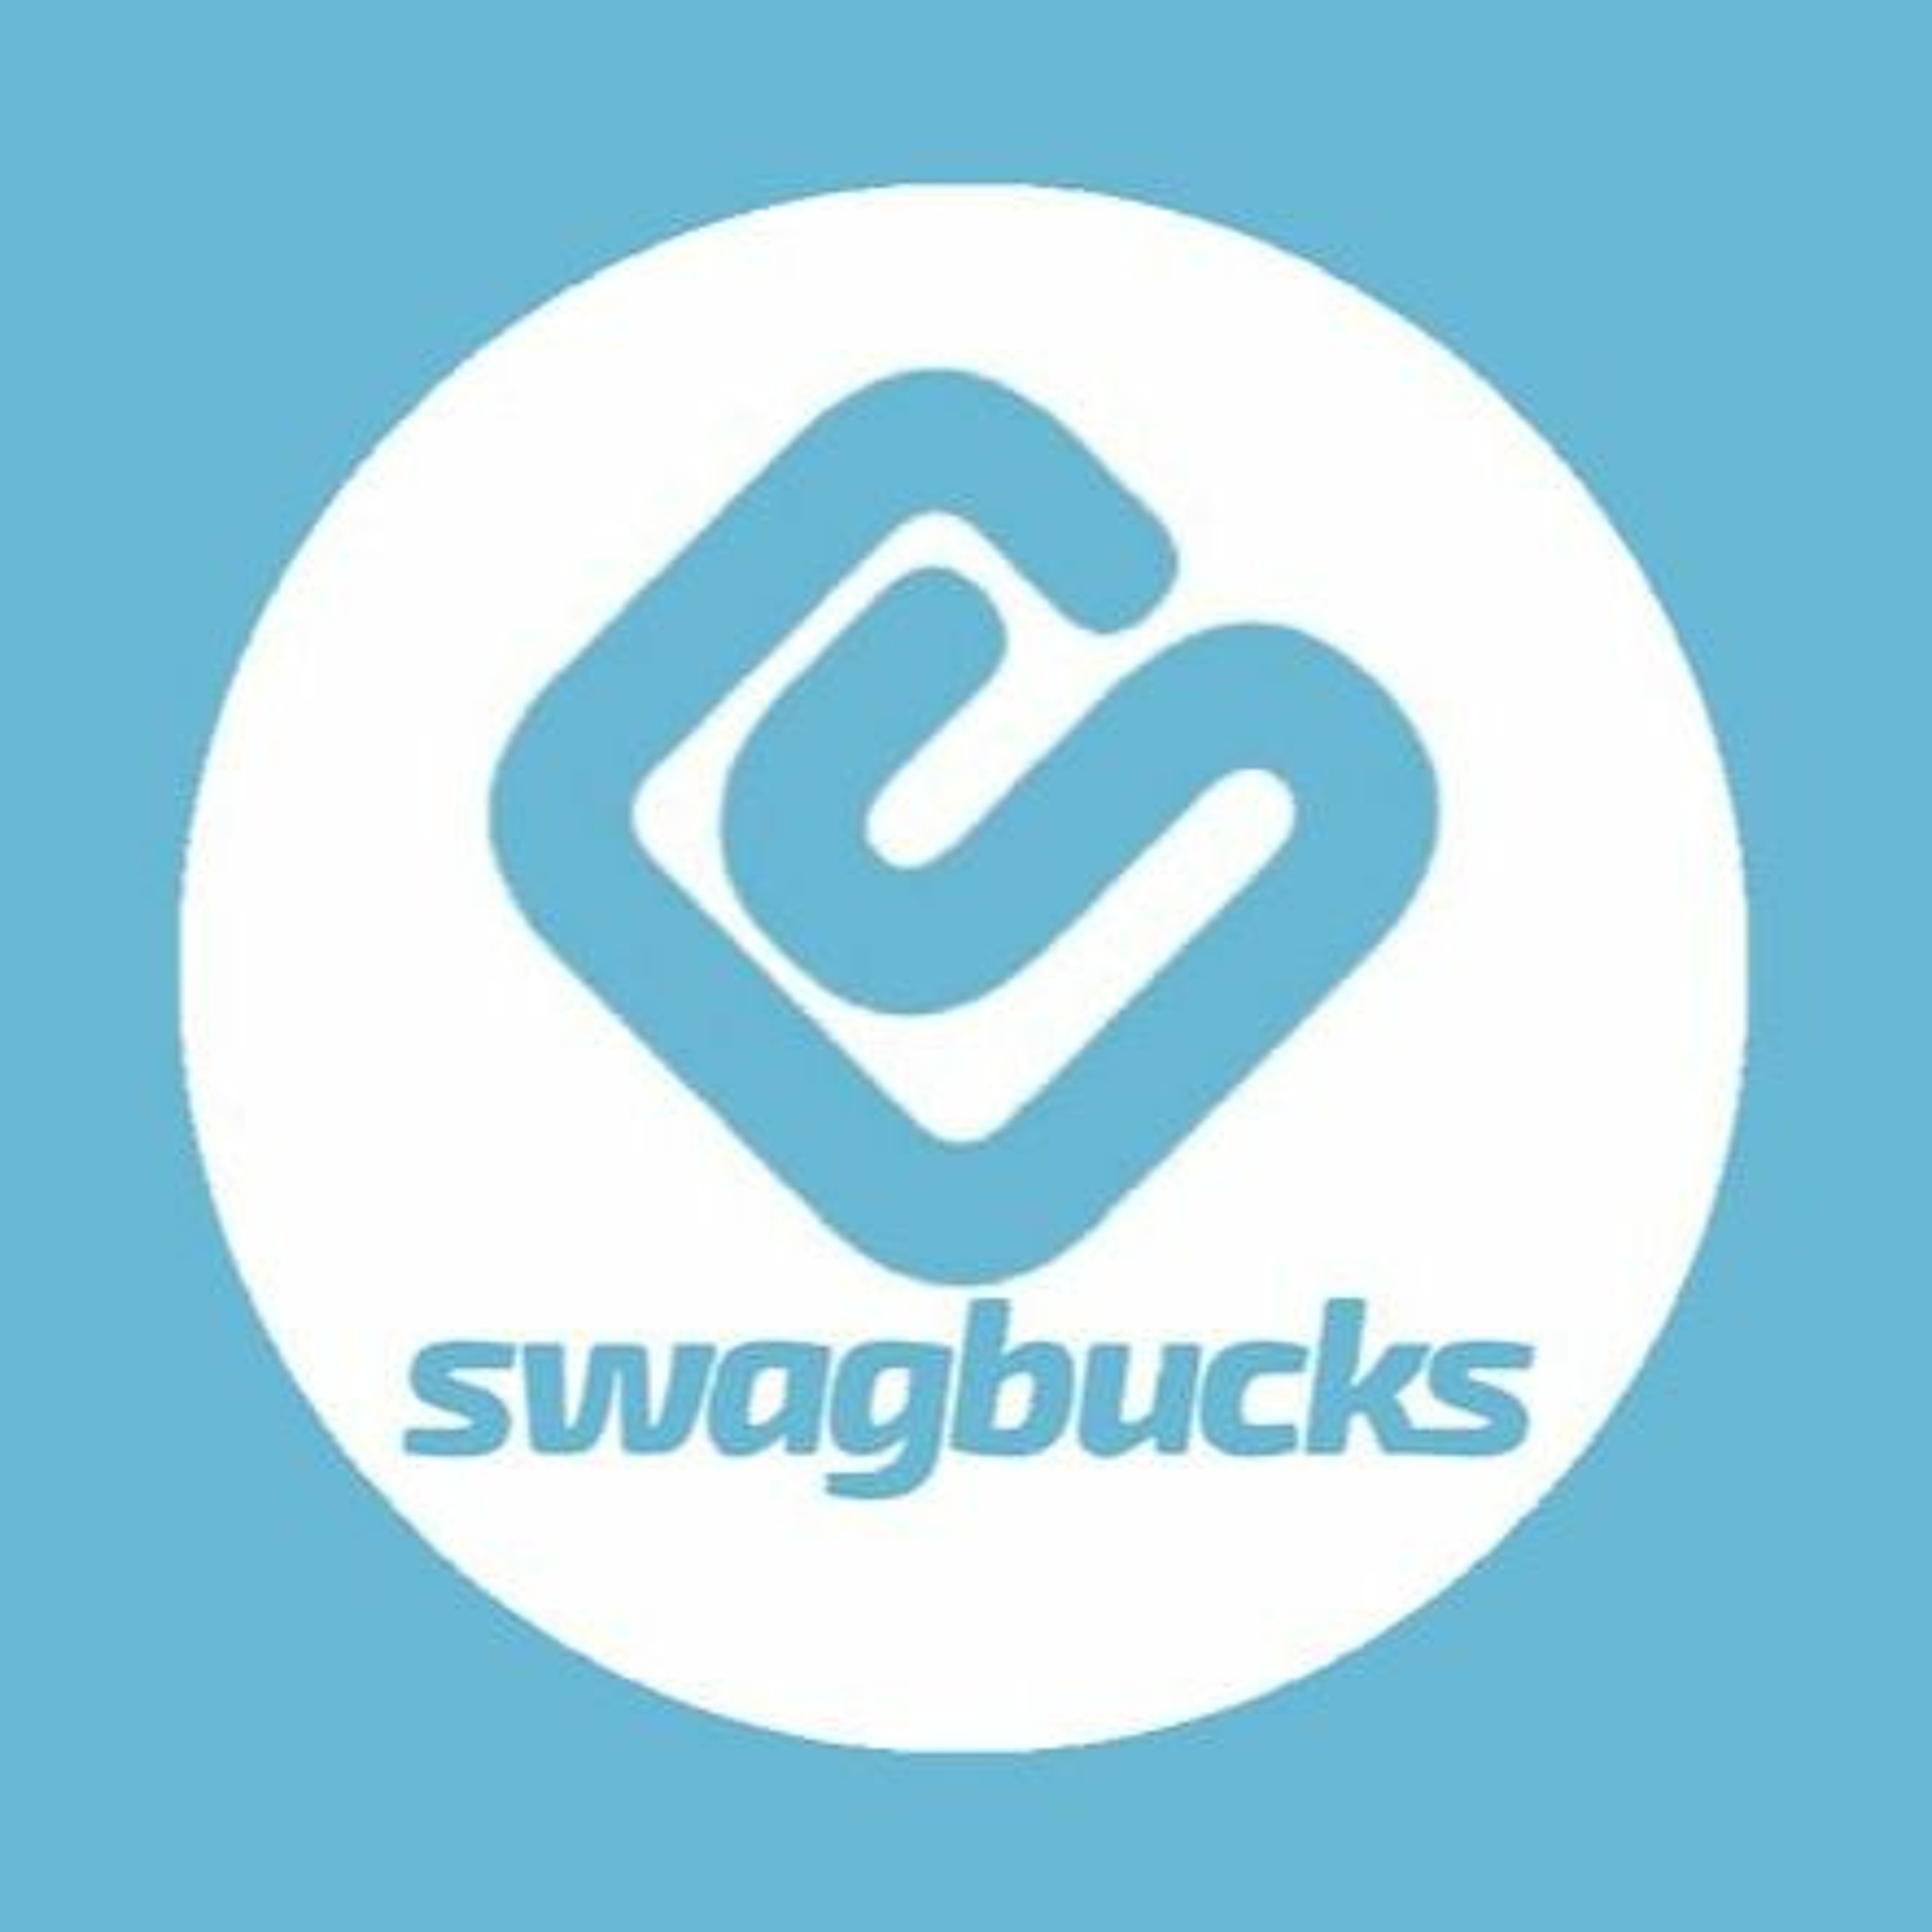 Episode 18: Make And Save Money With Swagbucks